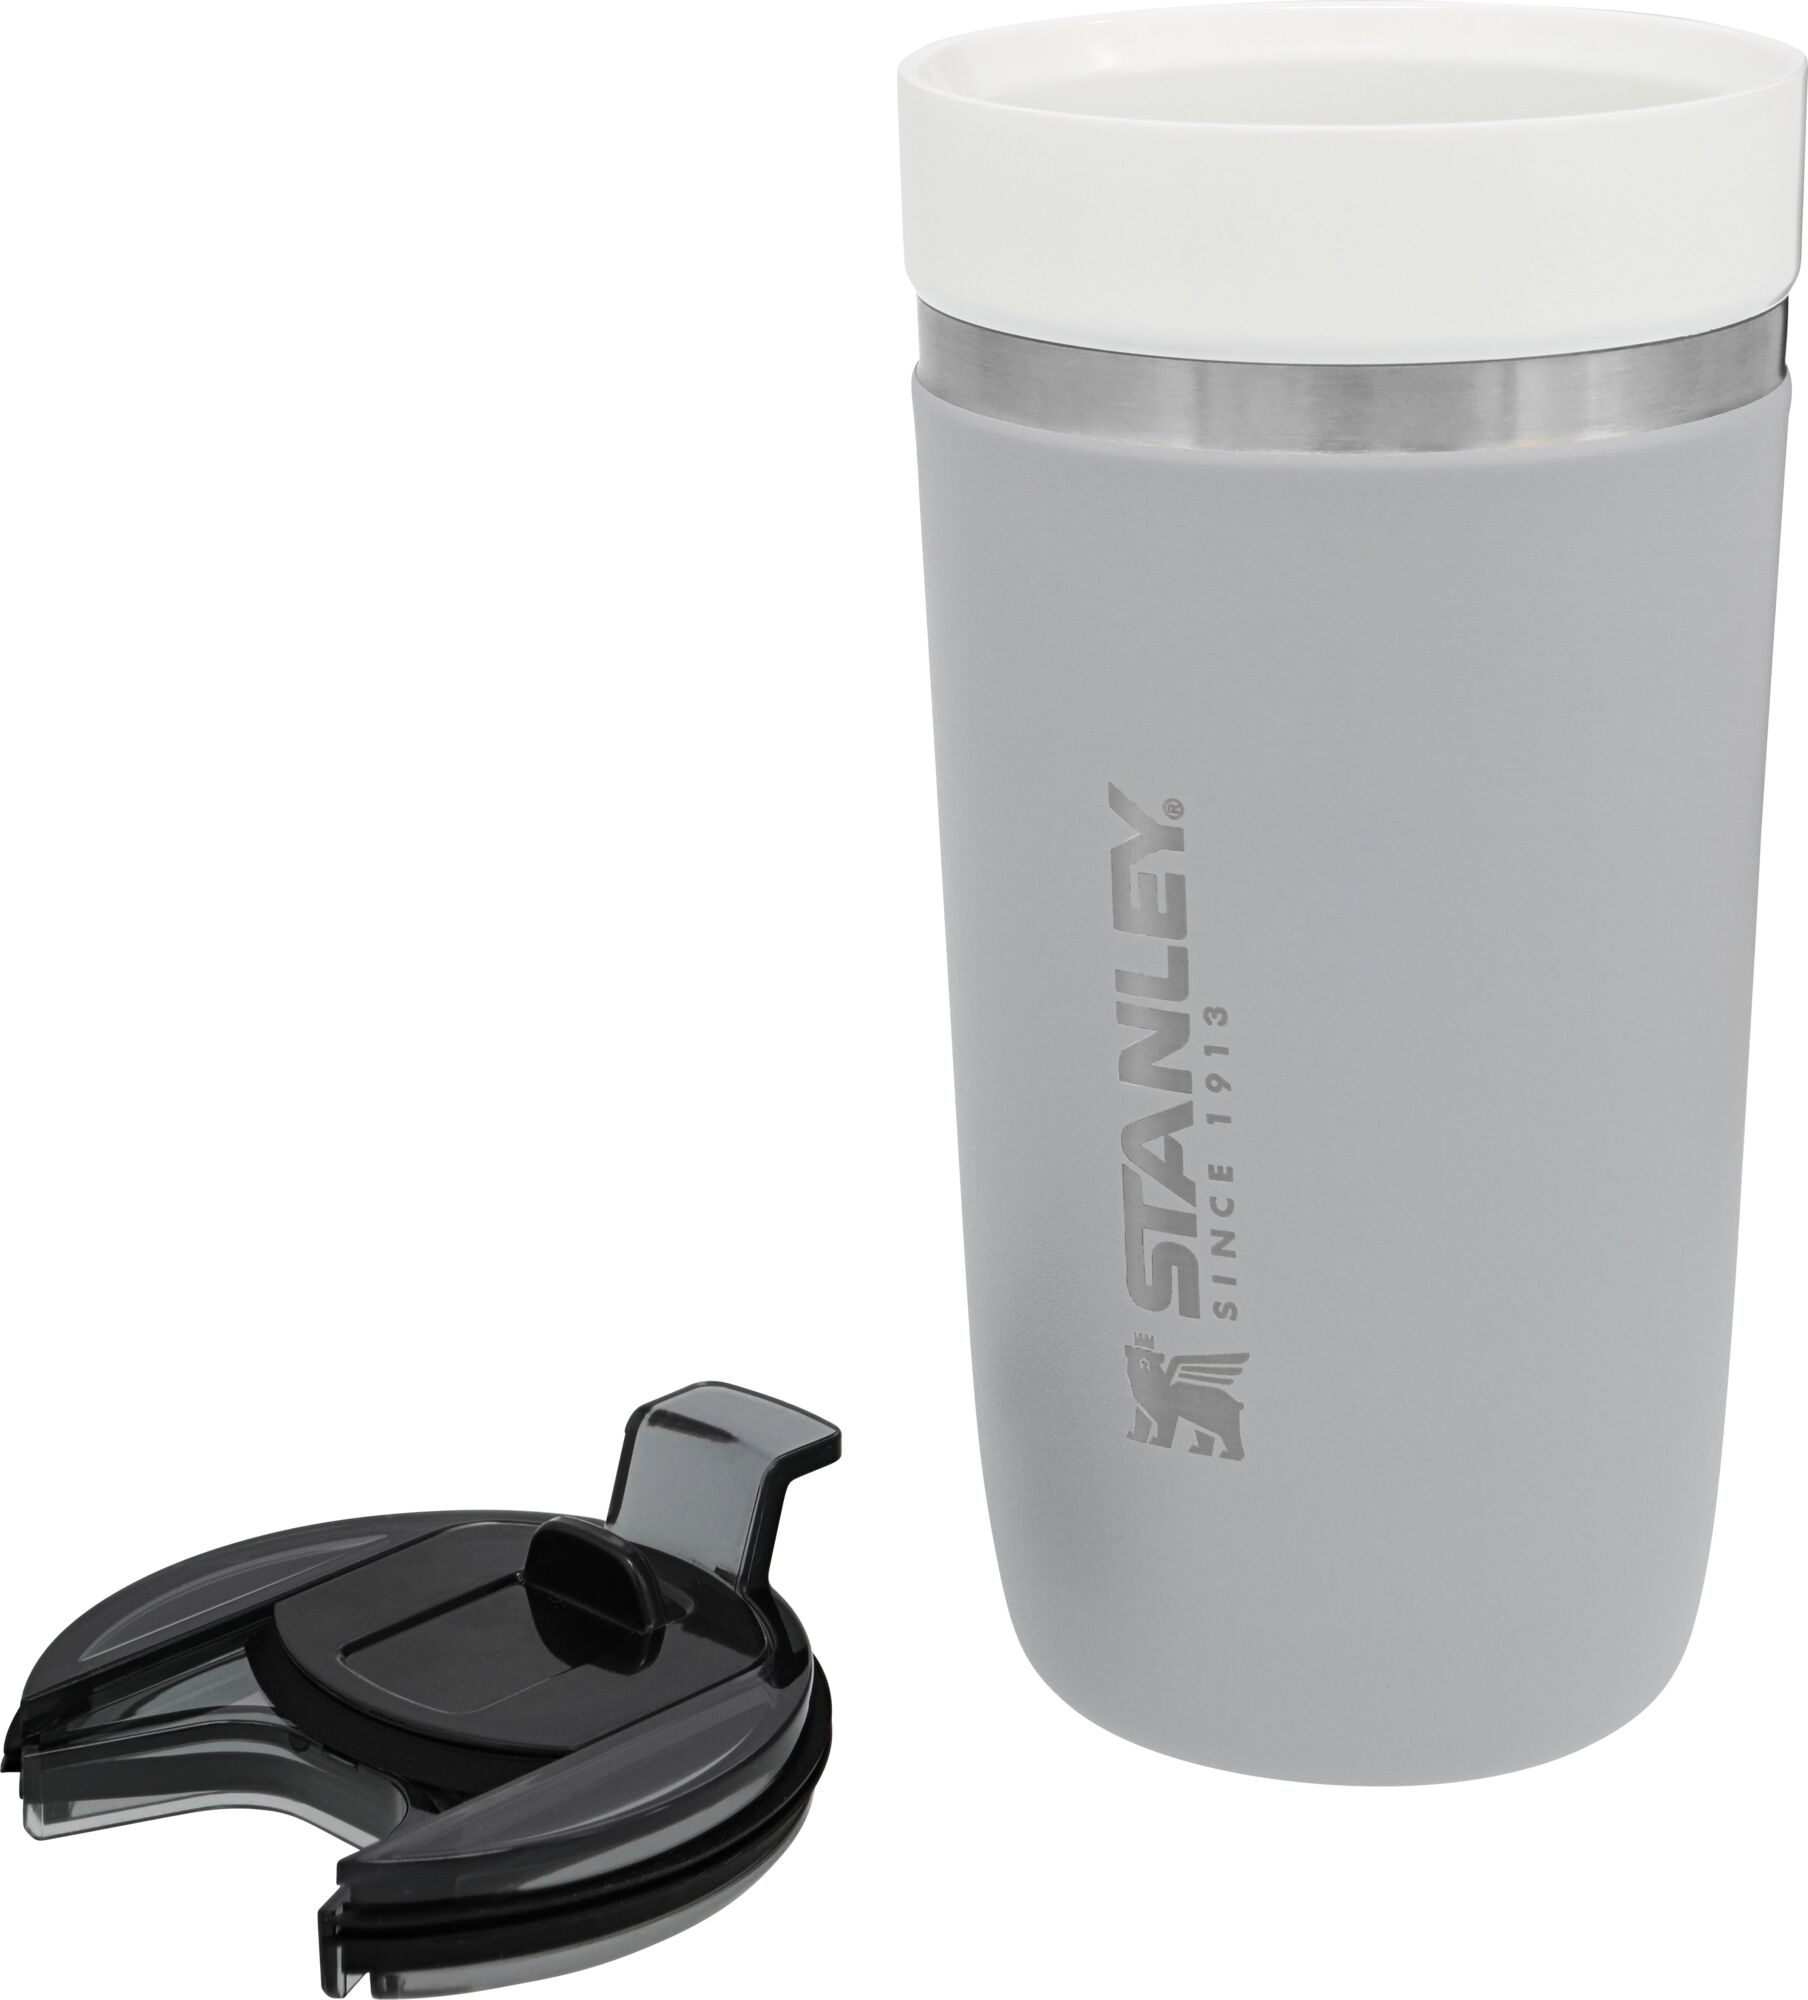 The Stanley GO Vacuum Insulated Tumbler Stainless Steel 16 Oz. is